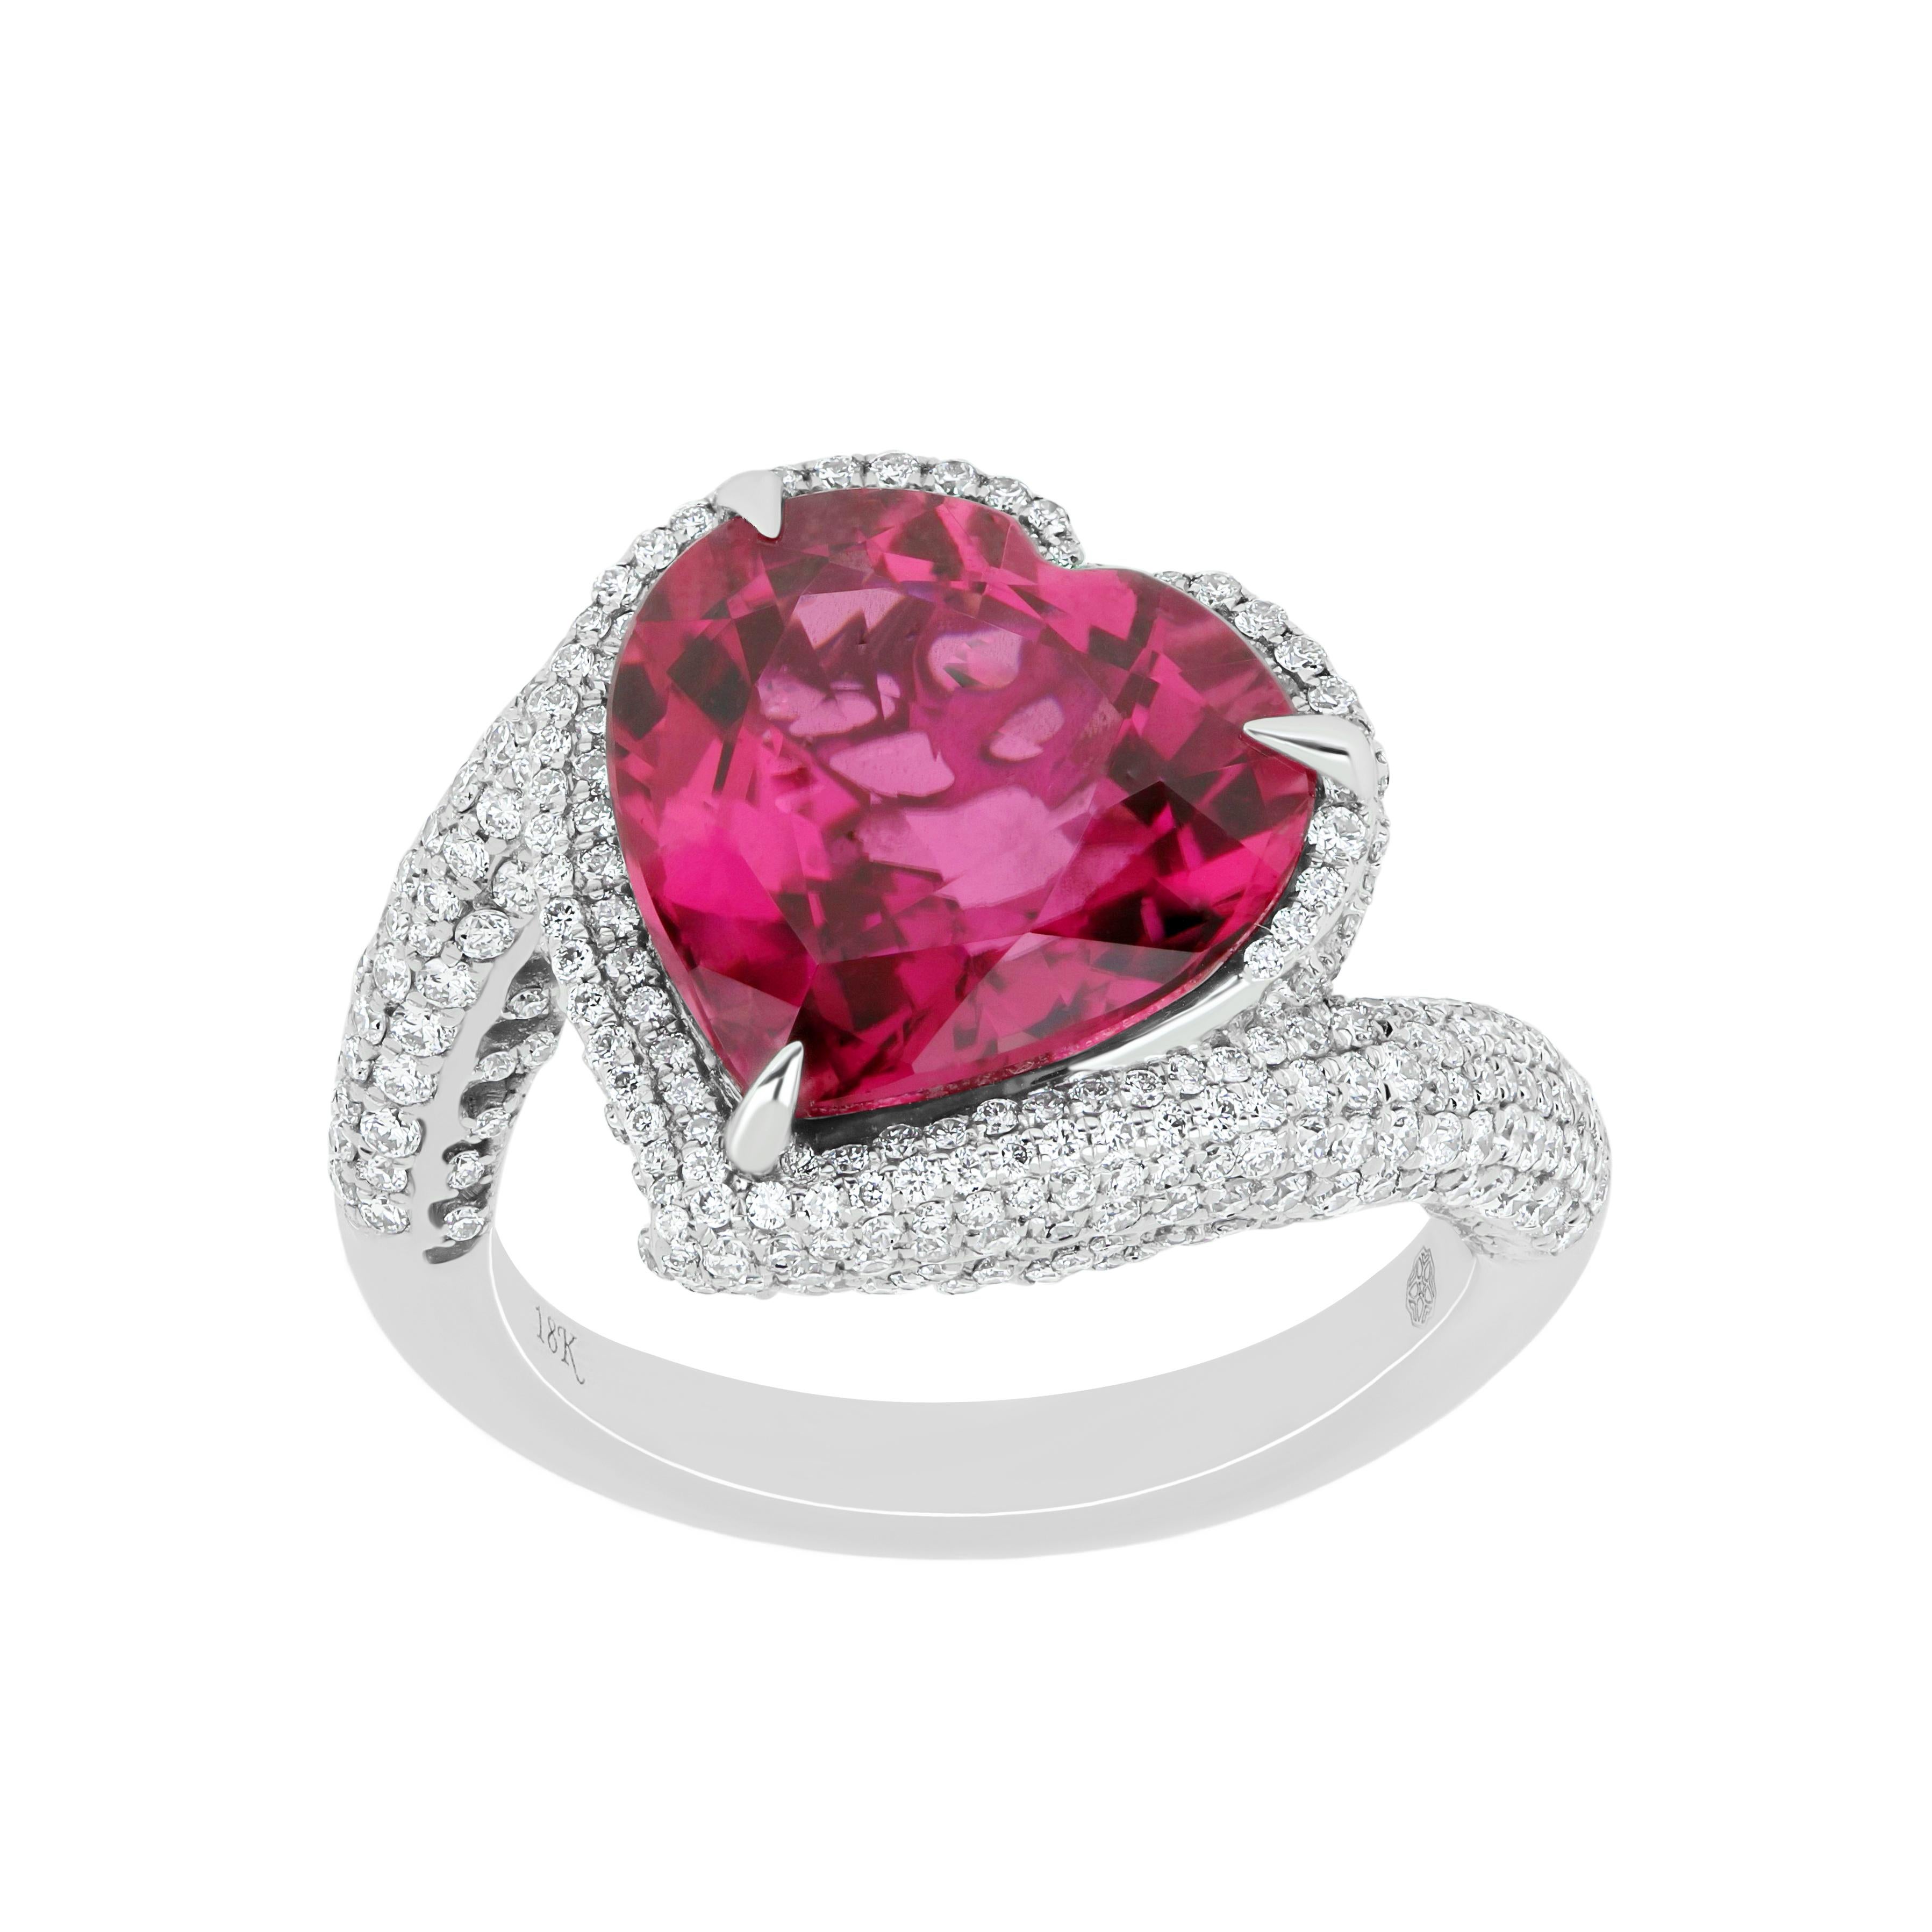 Heart Cut 6.8 Carats Rubellite and Diamond Studded Ring in 18K White Gold Ring For Sale